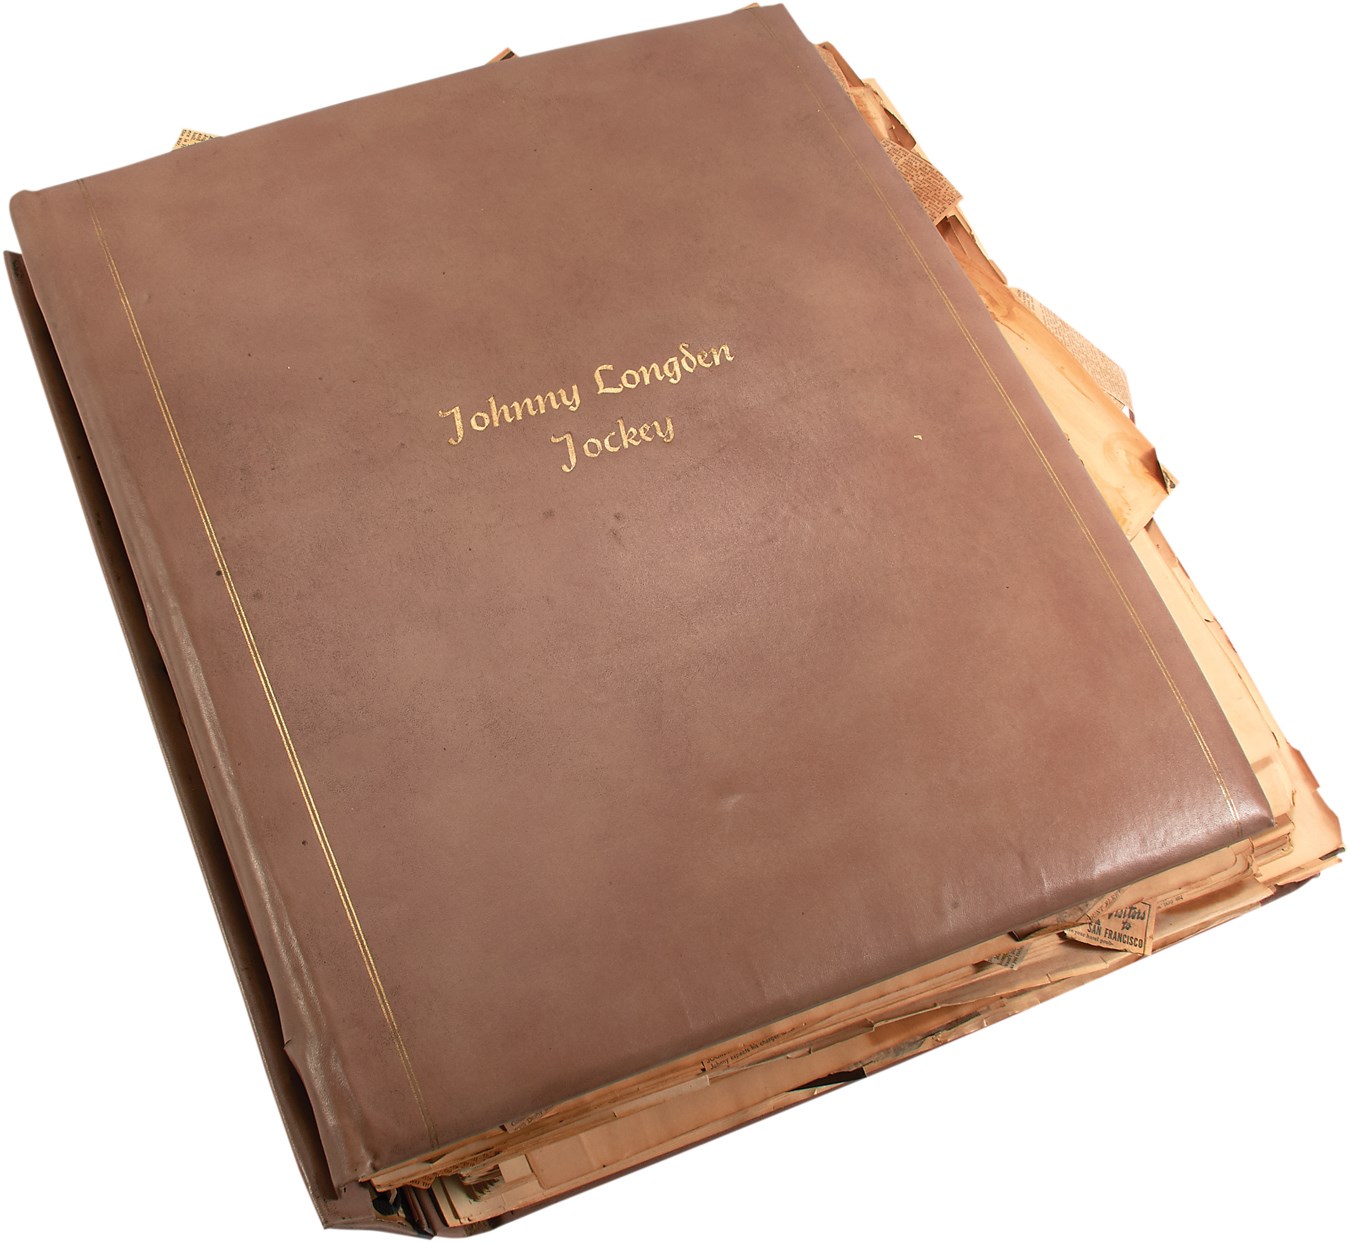 Horse Racing - Johnny Longden's Personal Hall of Fame Scrapbook (57lbs.)